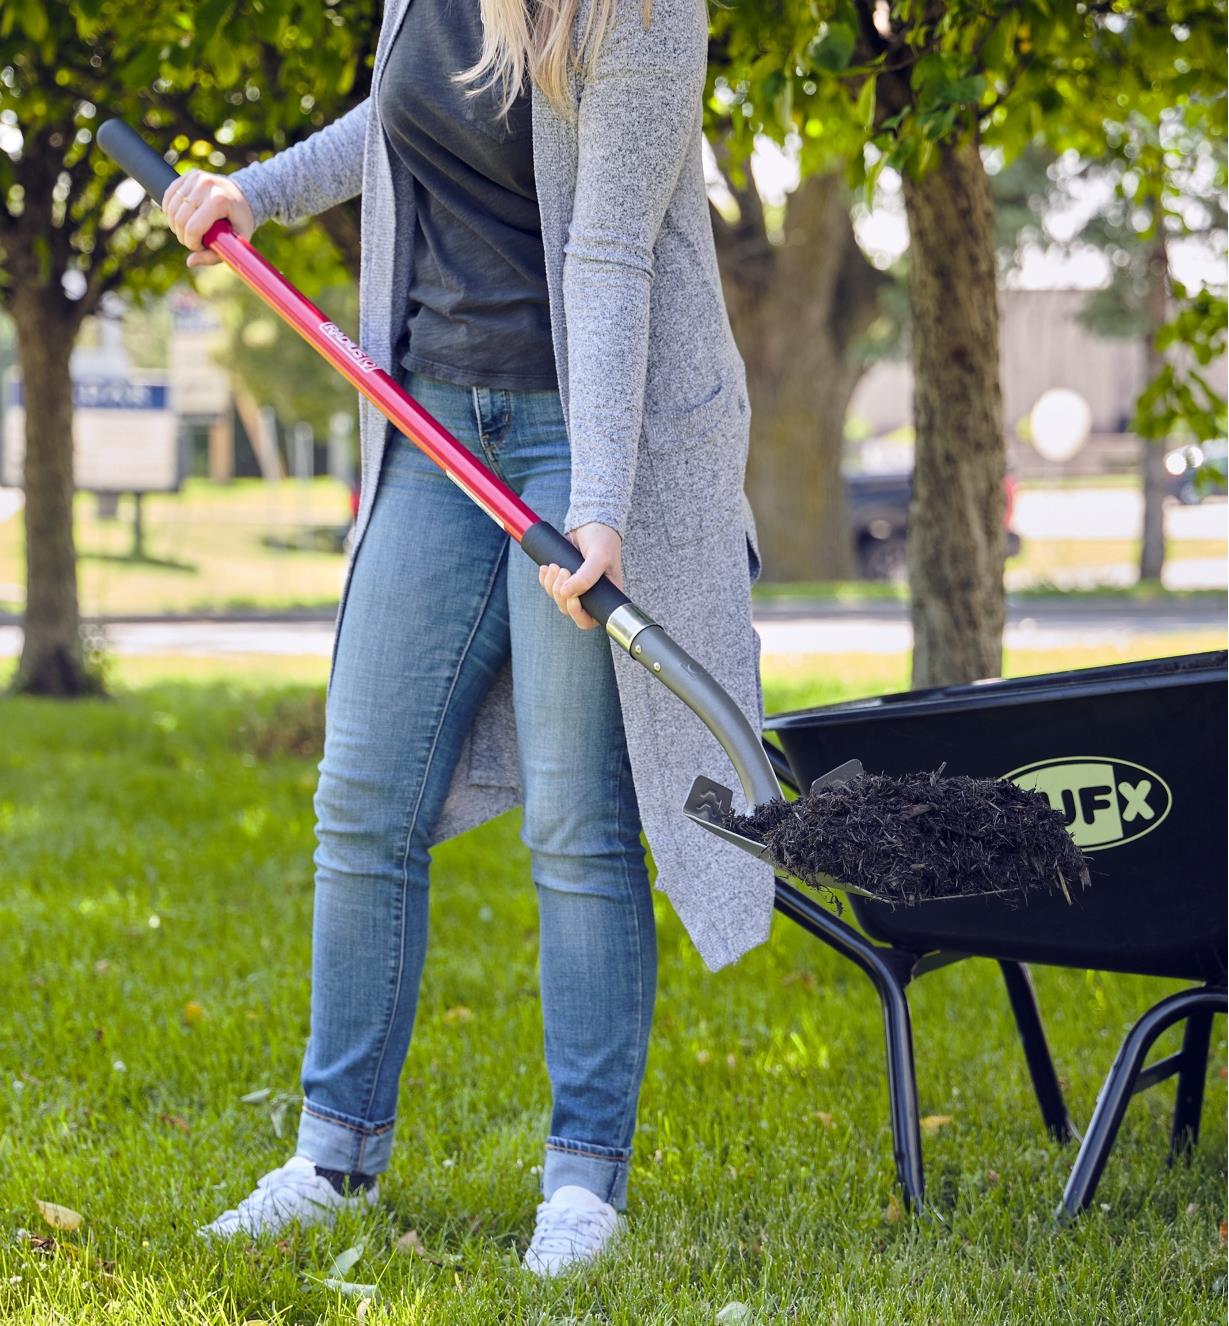 Transferring mulch from a yard cart using the long-handled square shovel